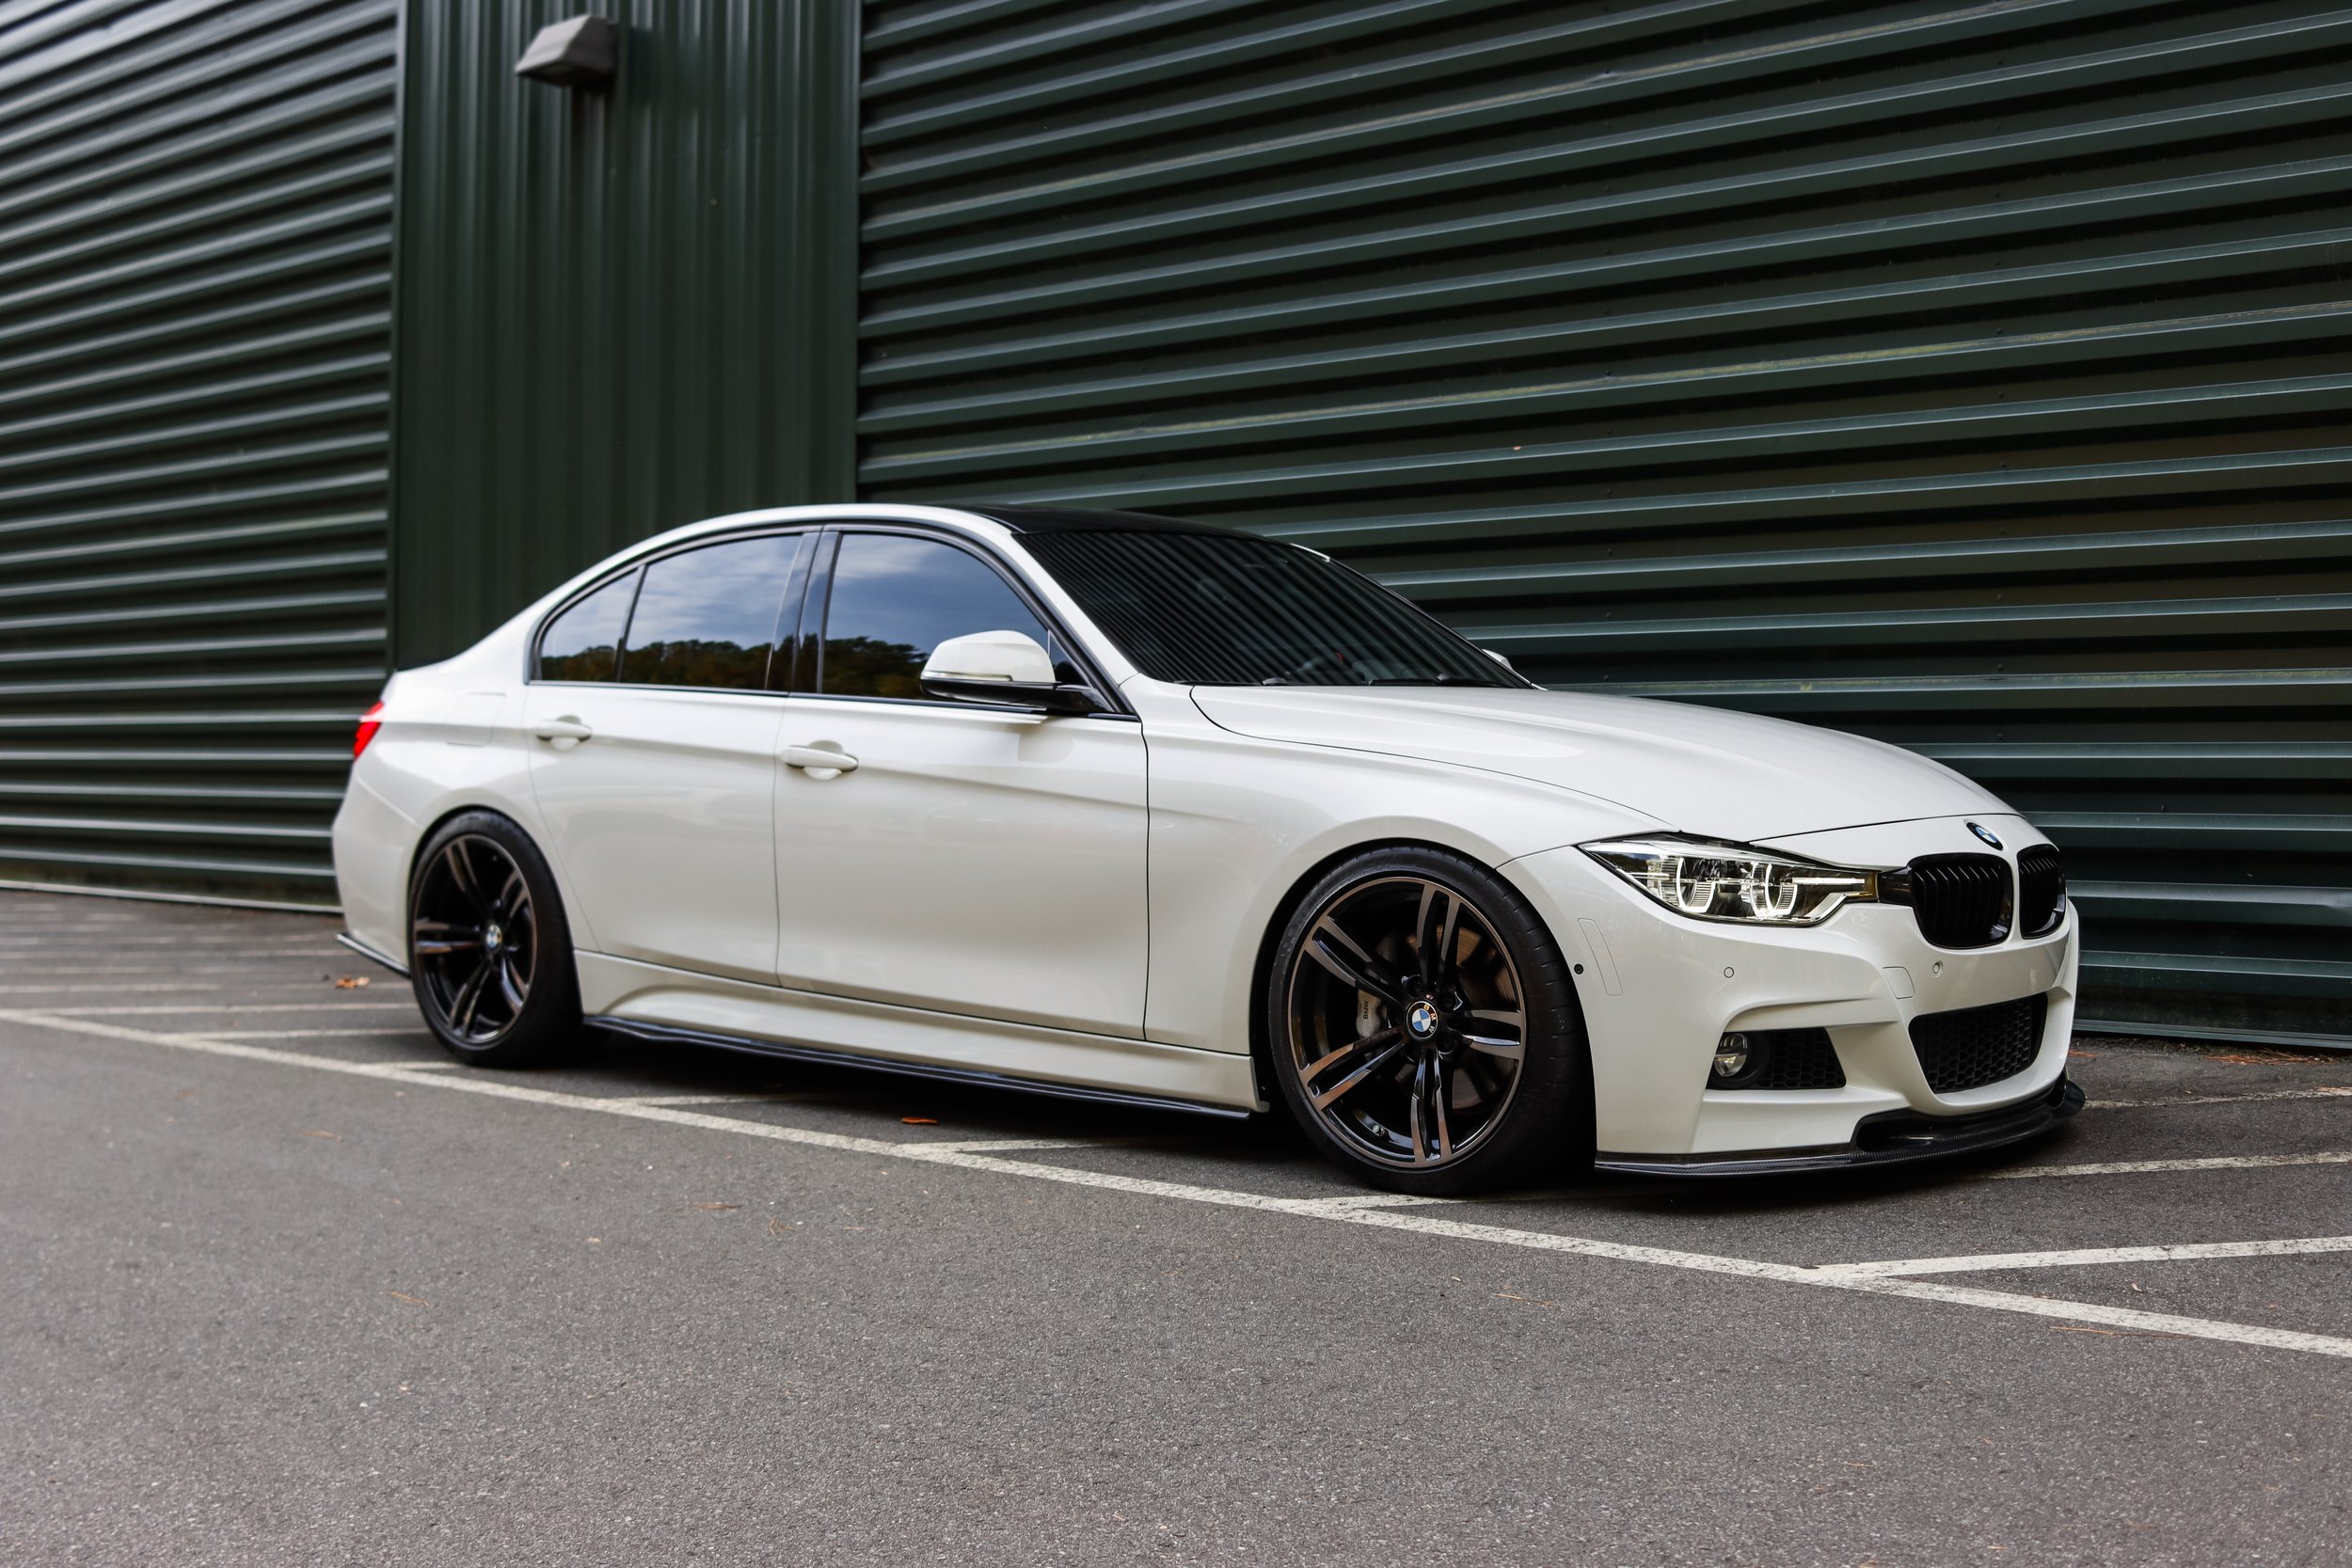 F30 BIMMERCODE: SPORT DISPLAYS — ThicWhips